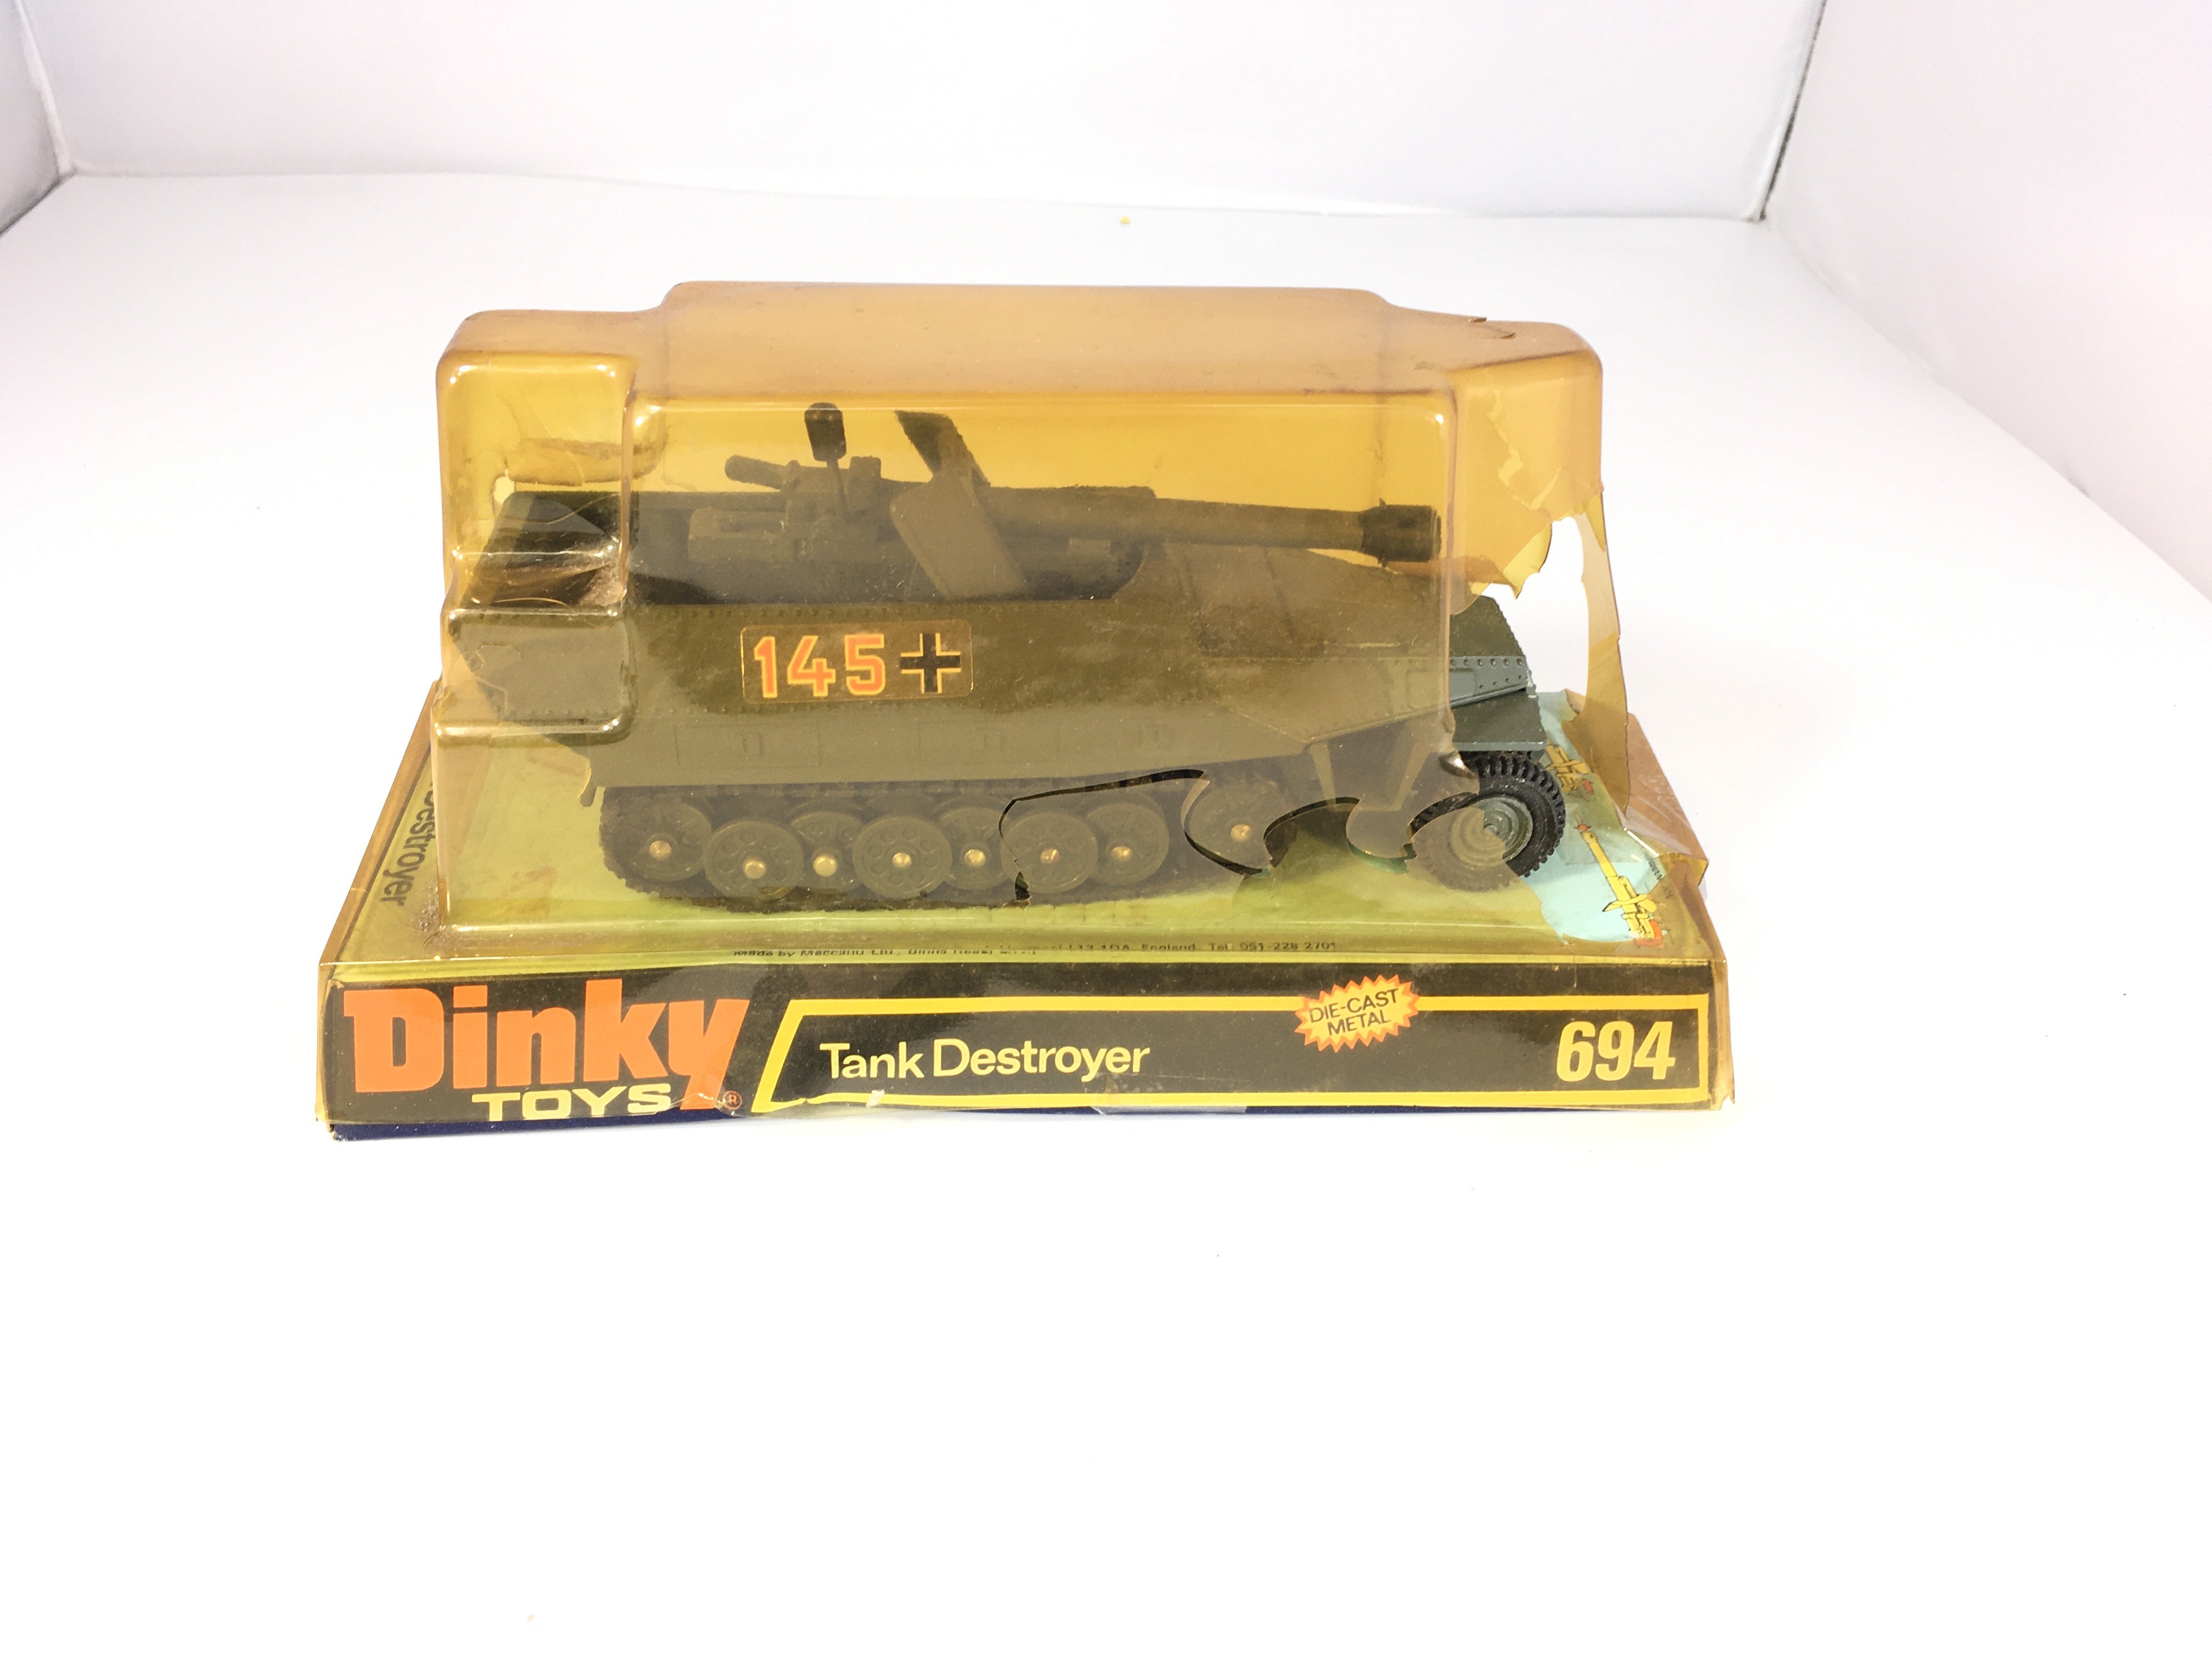 A Dinky Tank destroyer #694, plastic cover is dama